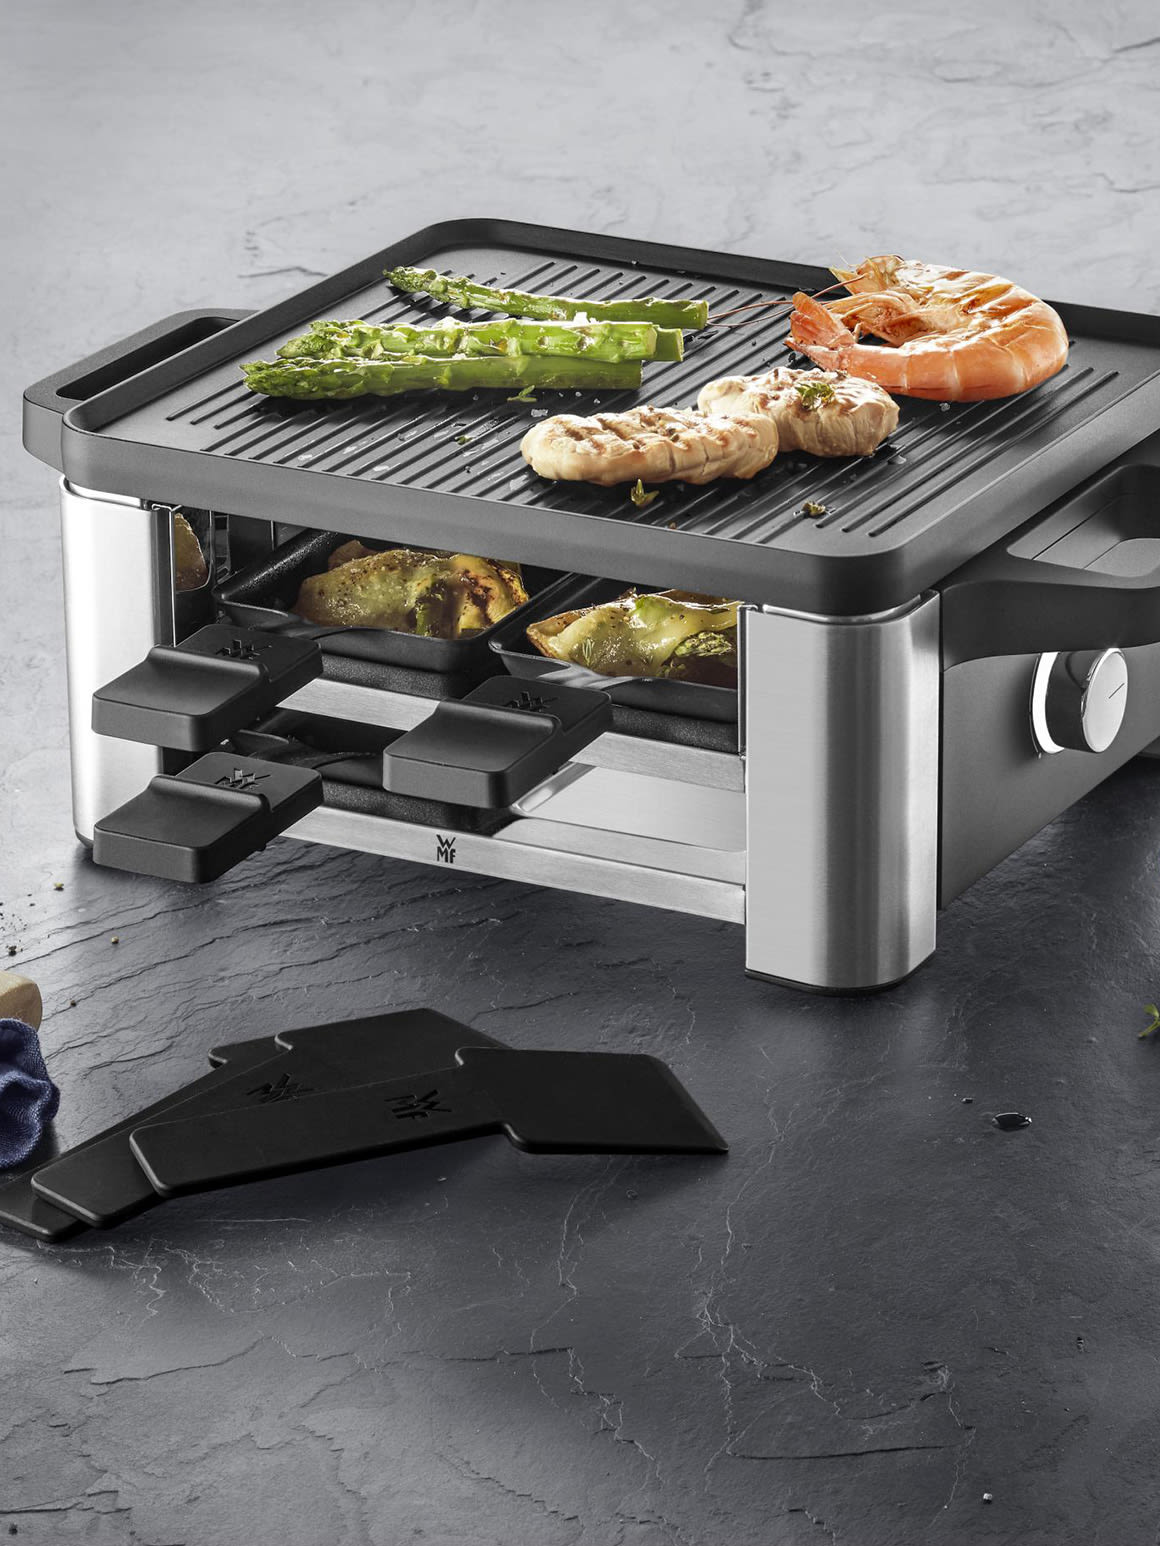 WMF Raclette Grill